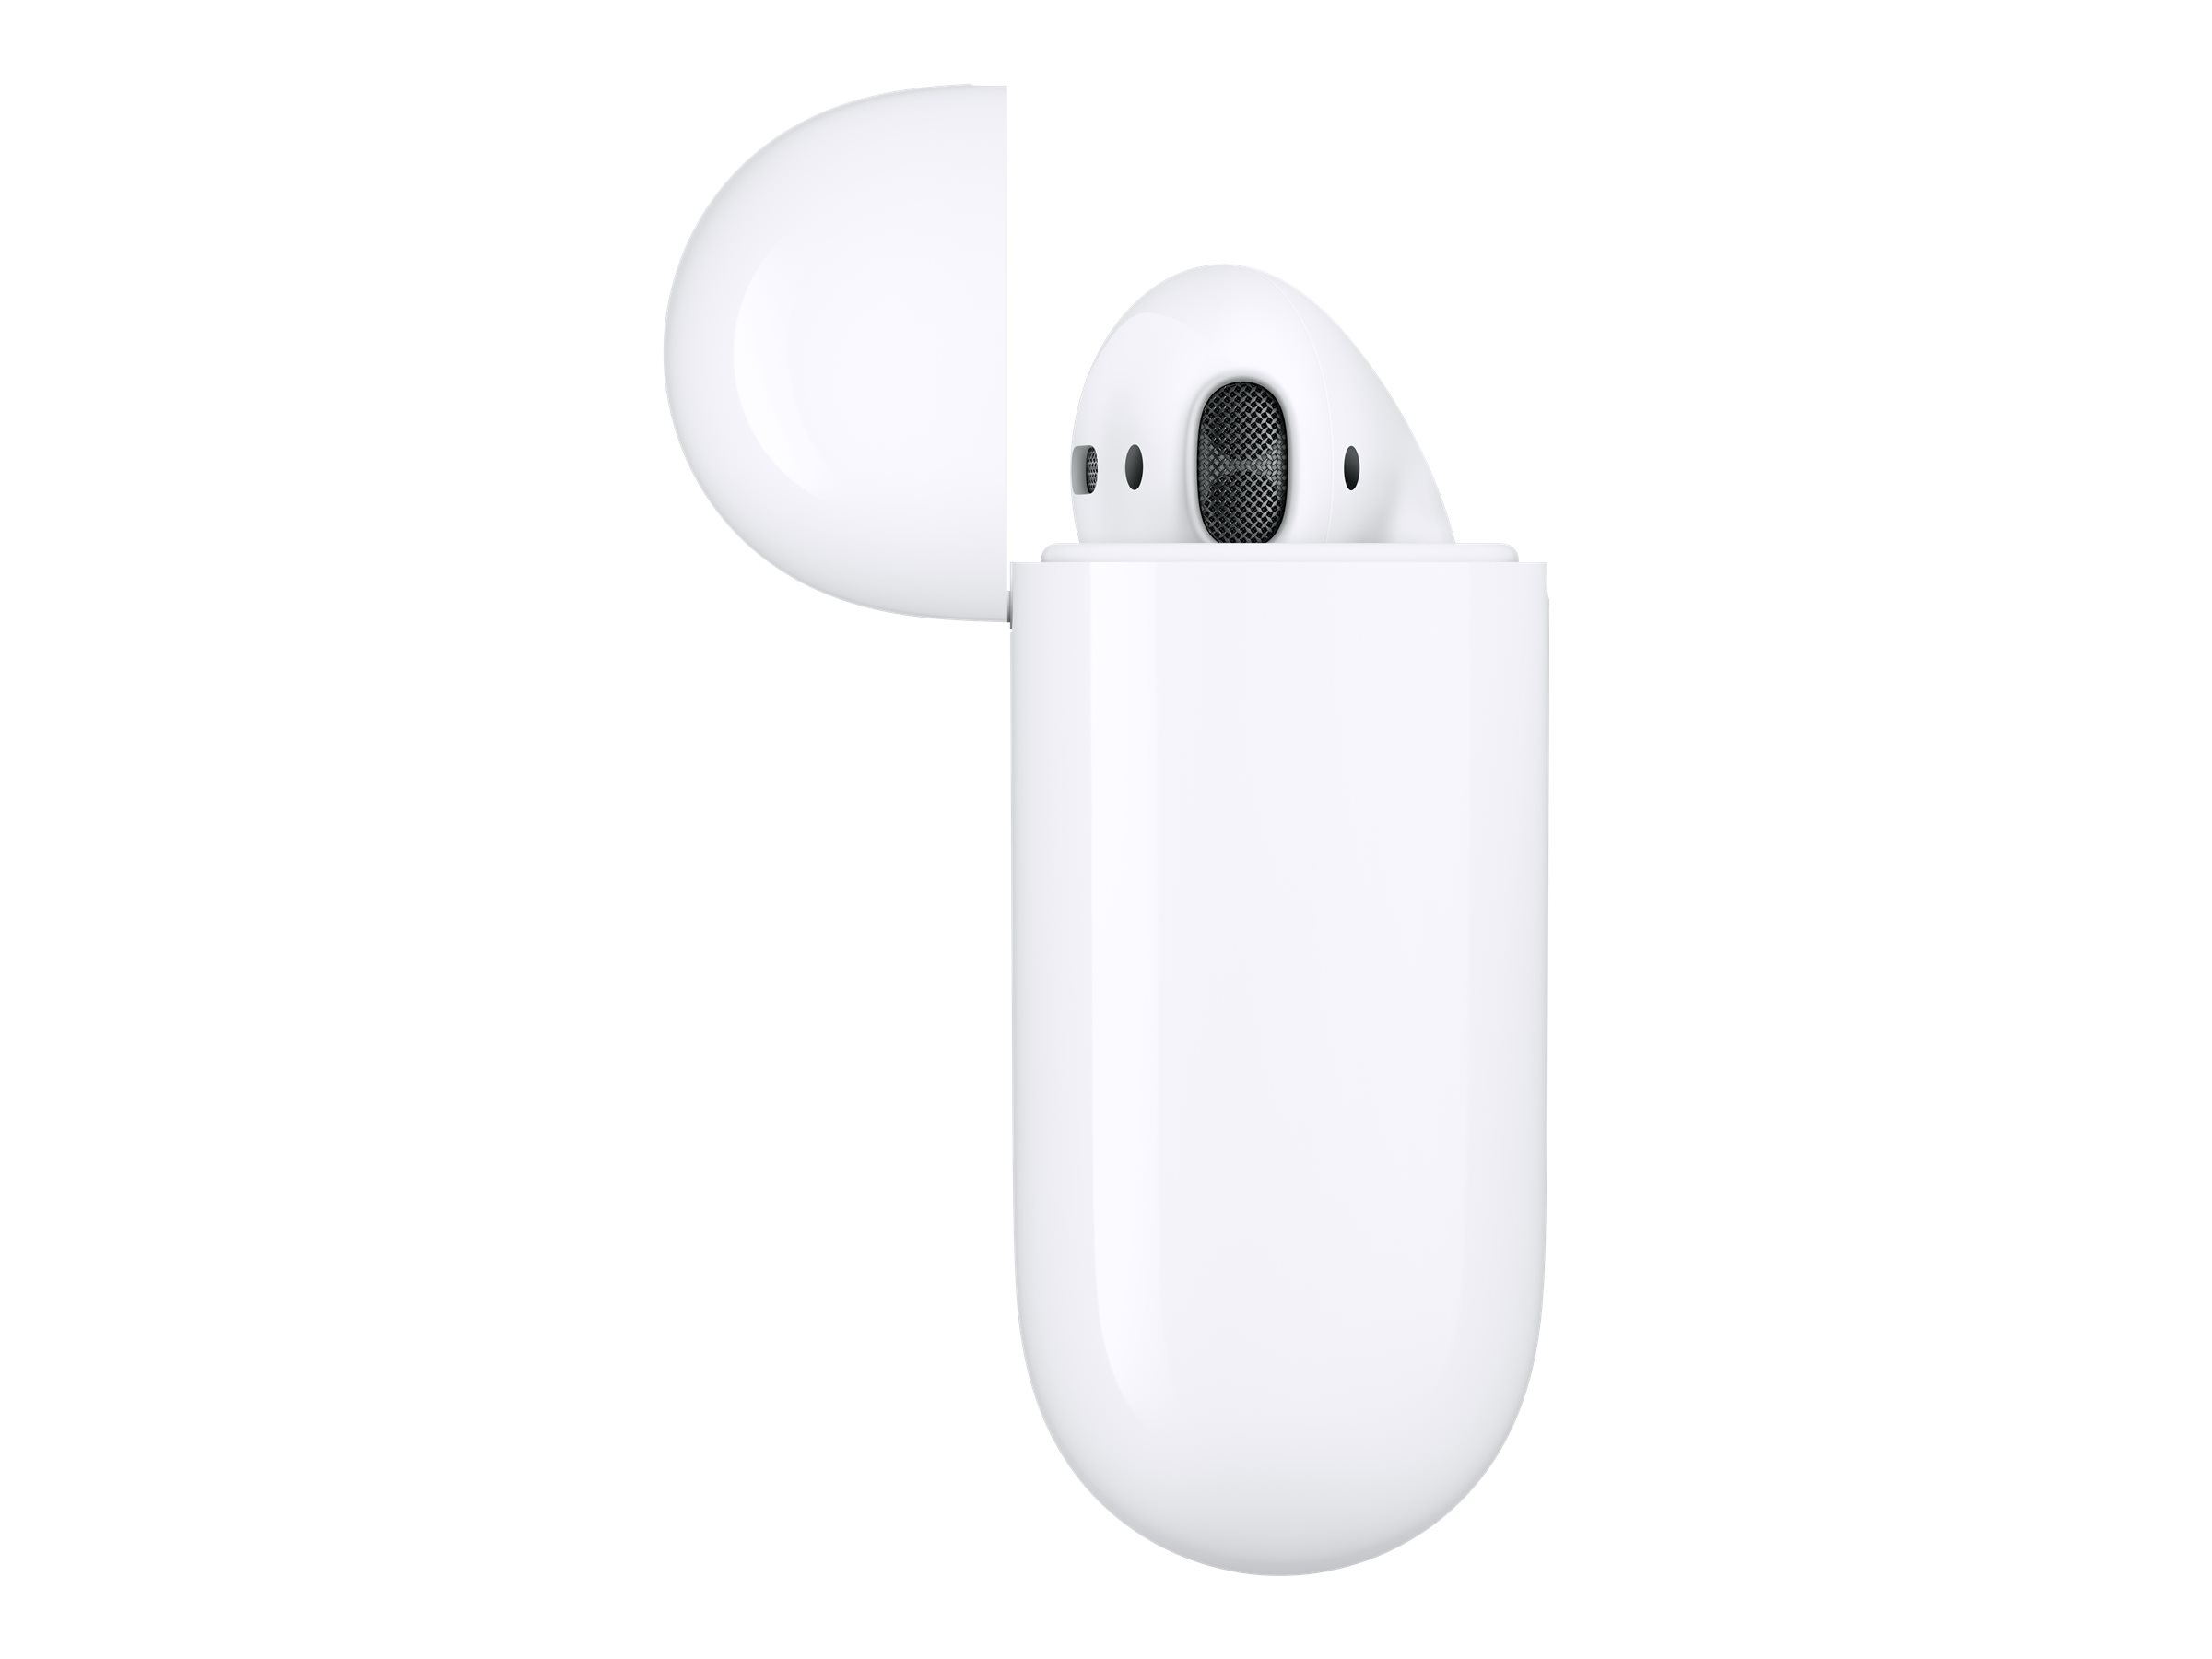 Apple AirPods with Charging Case - White - MV7N2AM/A